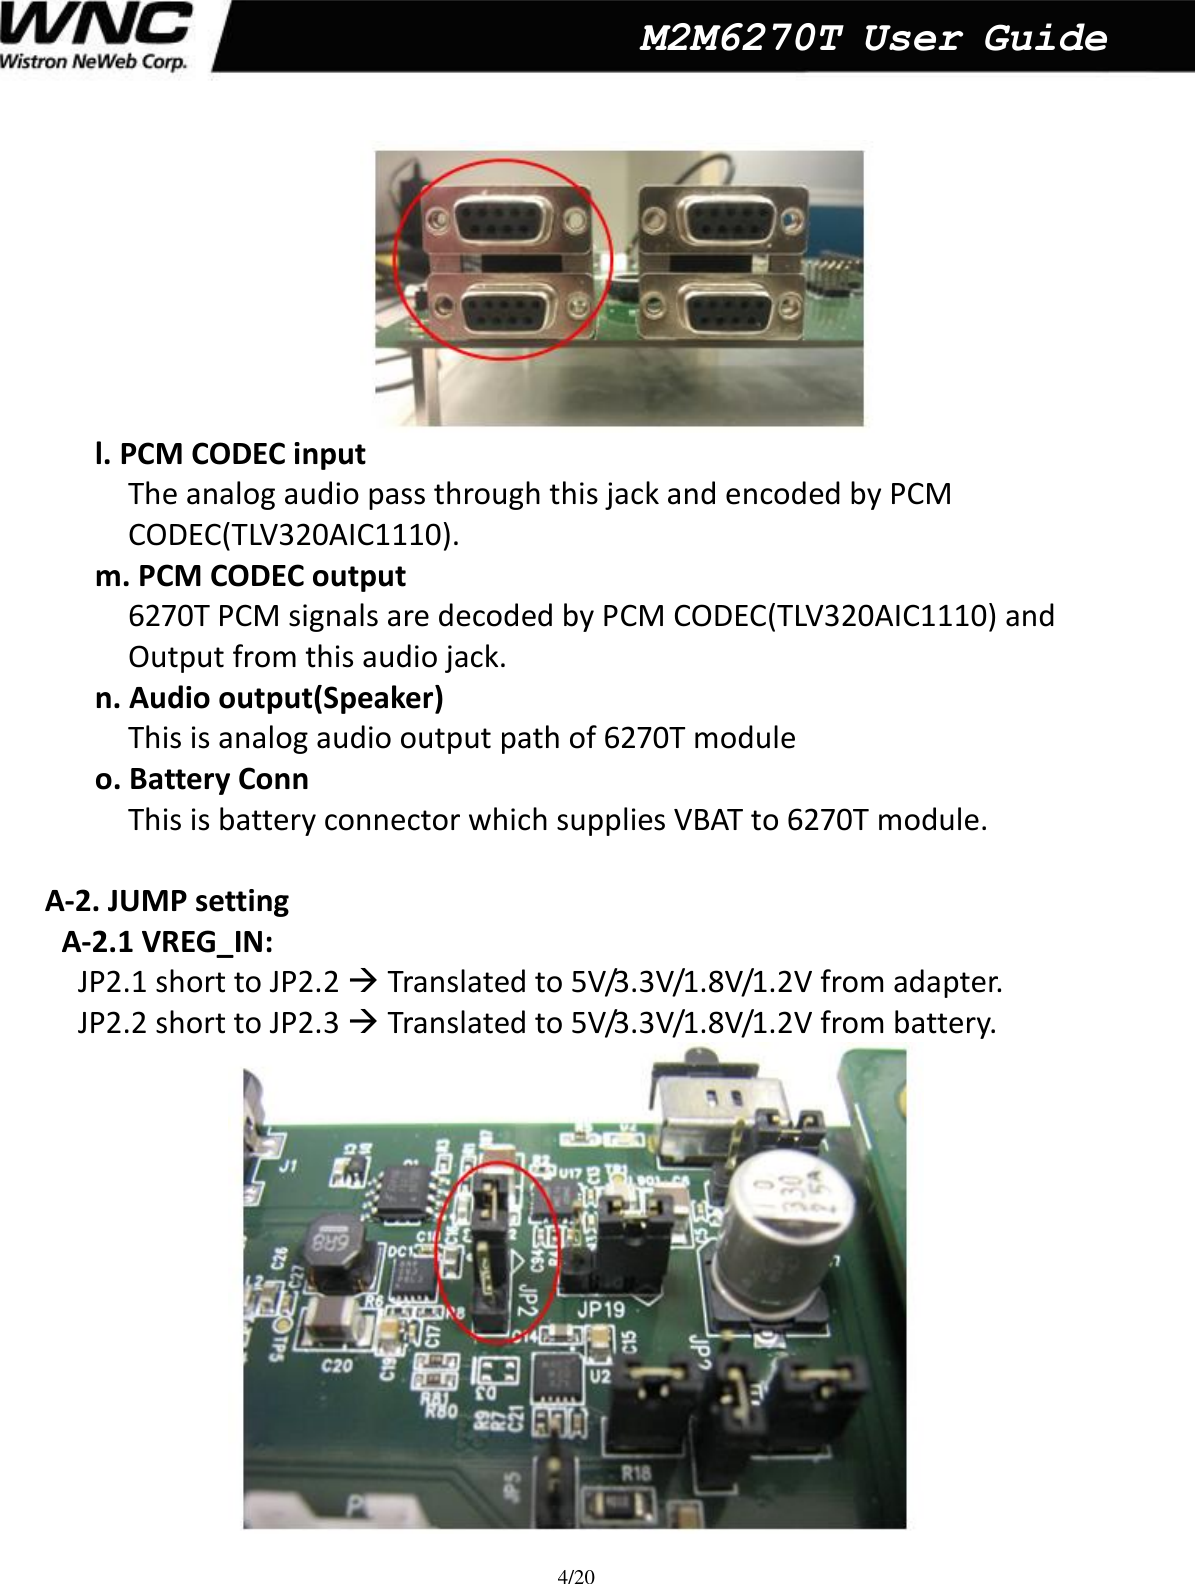  4/20  M2M6270T User Guide  l. PCM CODEC input The analog audio pass through this jack and encoded by PCM   CODEC(TLV320AIC1110). m. PCM CODEC output   6270T PCM signals are decoded by PCM CODEC(TLV320AIC1110) and   Output from this audio jack. n. Audio output(Speaker) This is analog audio output path of 6270T module  o. Battery Conn This is battery connector which supplies VBAT to 6270T module.    A-2. JUMP setting   A-2.1 VREG_IN: JP2.1 short to JP2.2  Translated to 5V/3.3V/1.8V/1.2V from adapter.   JP2.2 short to JP2.3  Translated to 5V/3.3V/1.8V/1.2V from battery.    